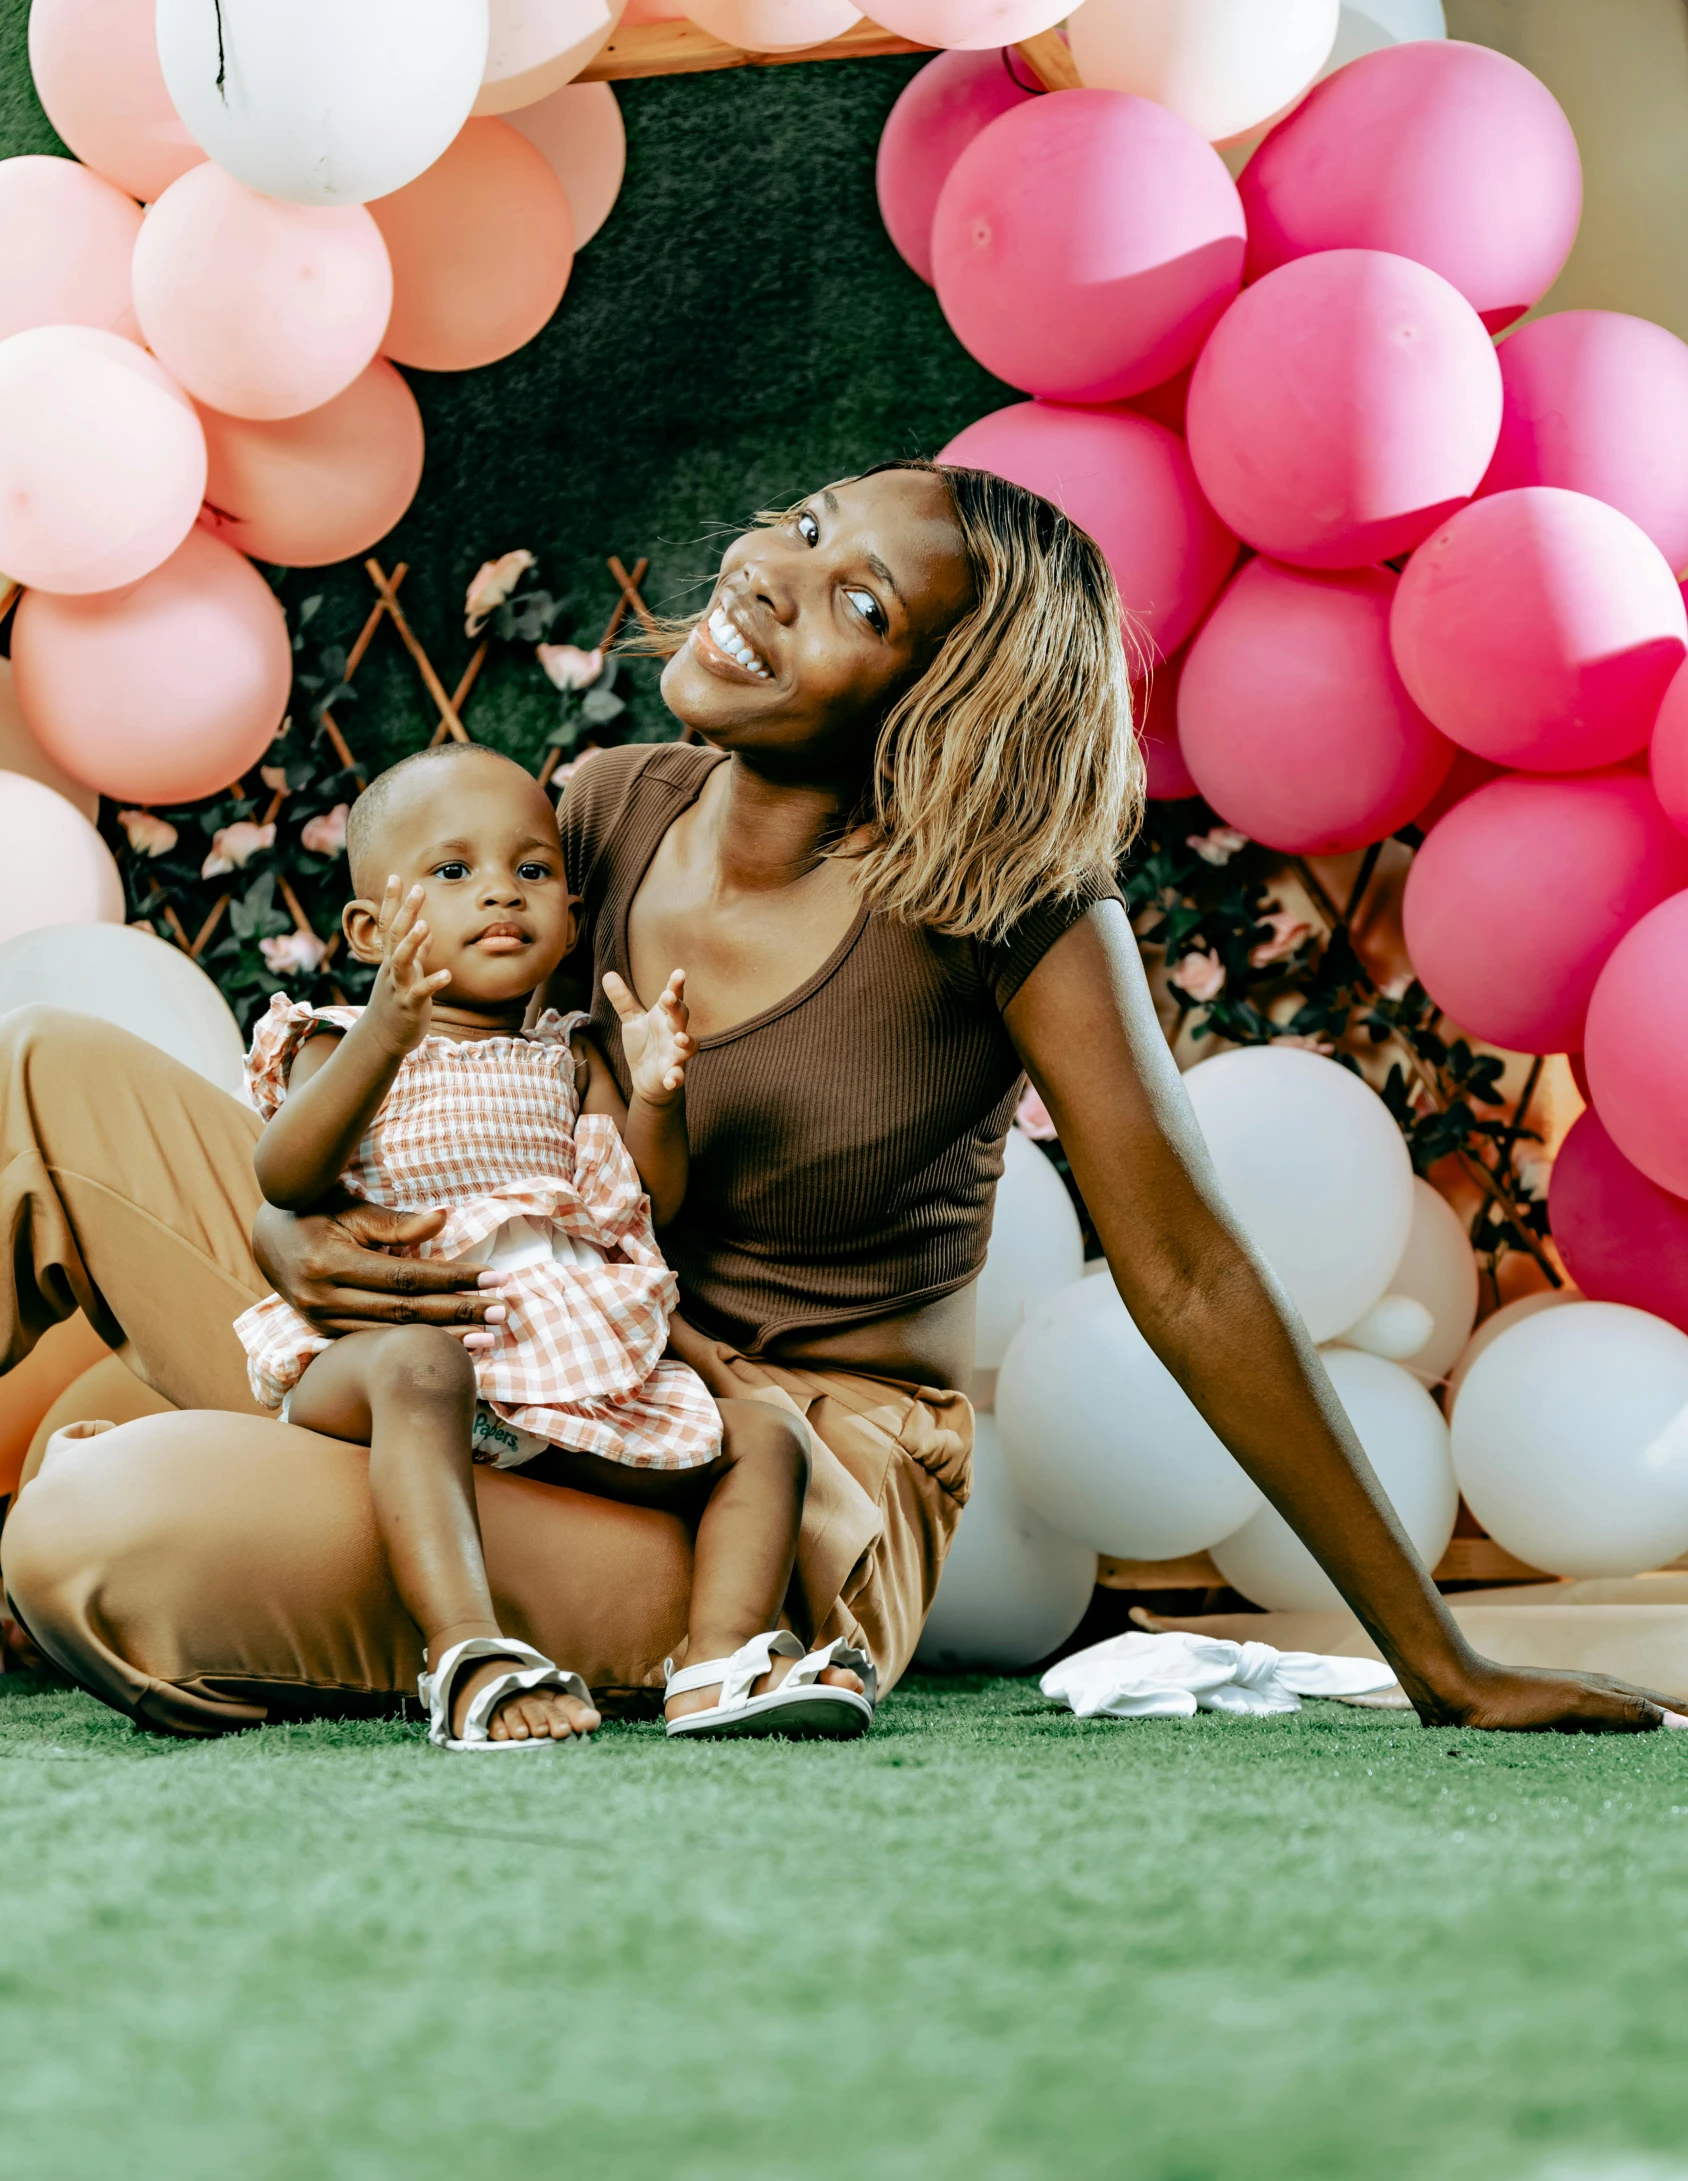 a woman sits in front of balloons with her baby